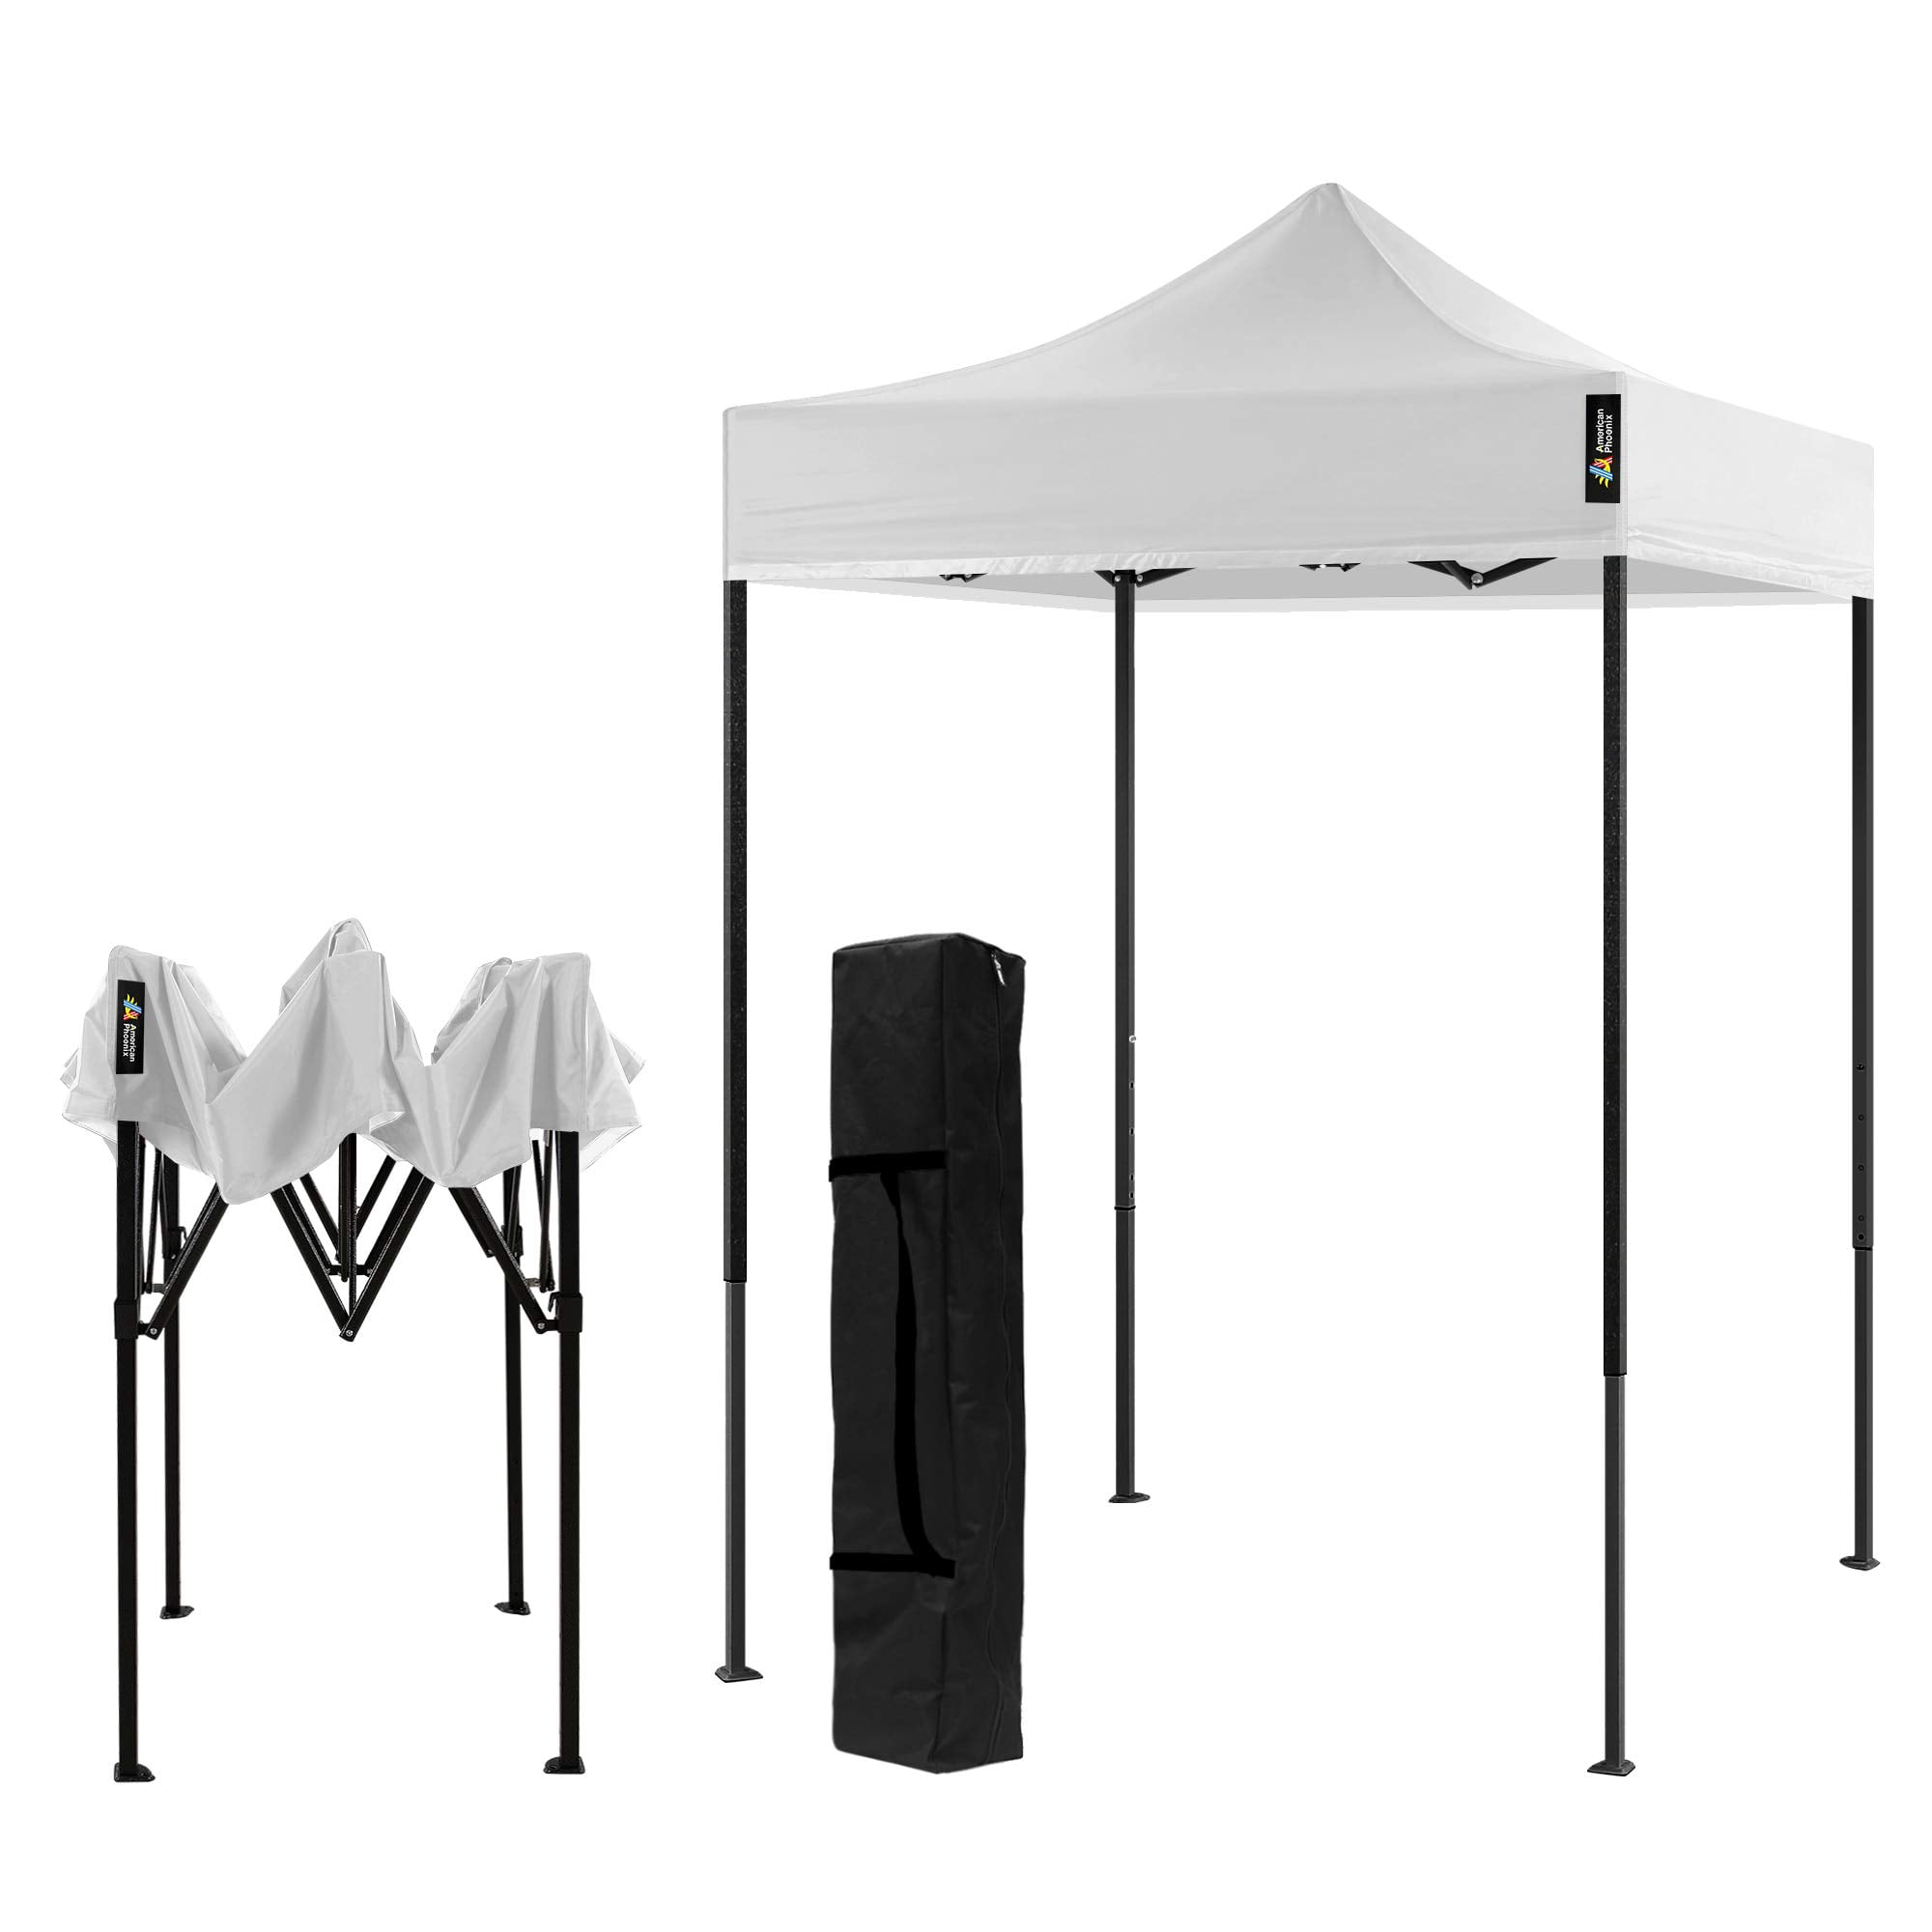 Impact Canopy 5x5 Pop Up Canopy Tent, Lightweight Powder Coated 